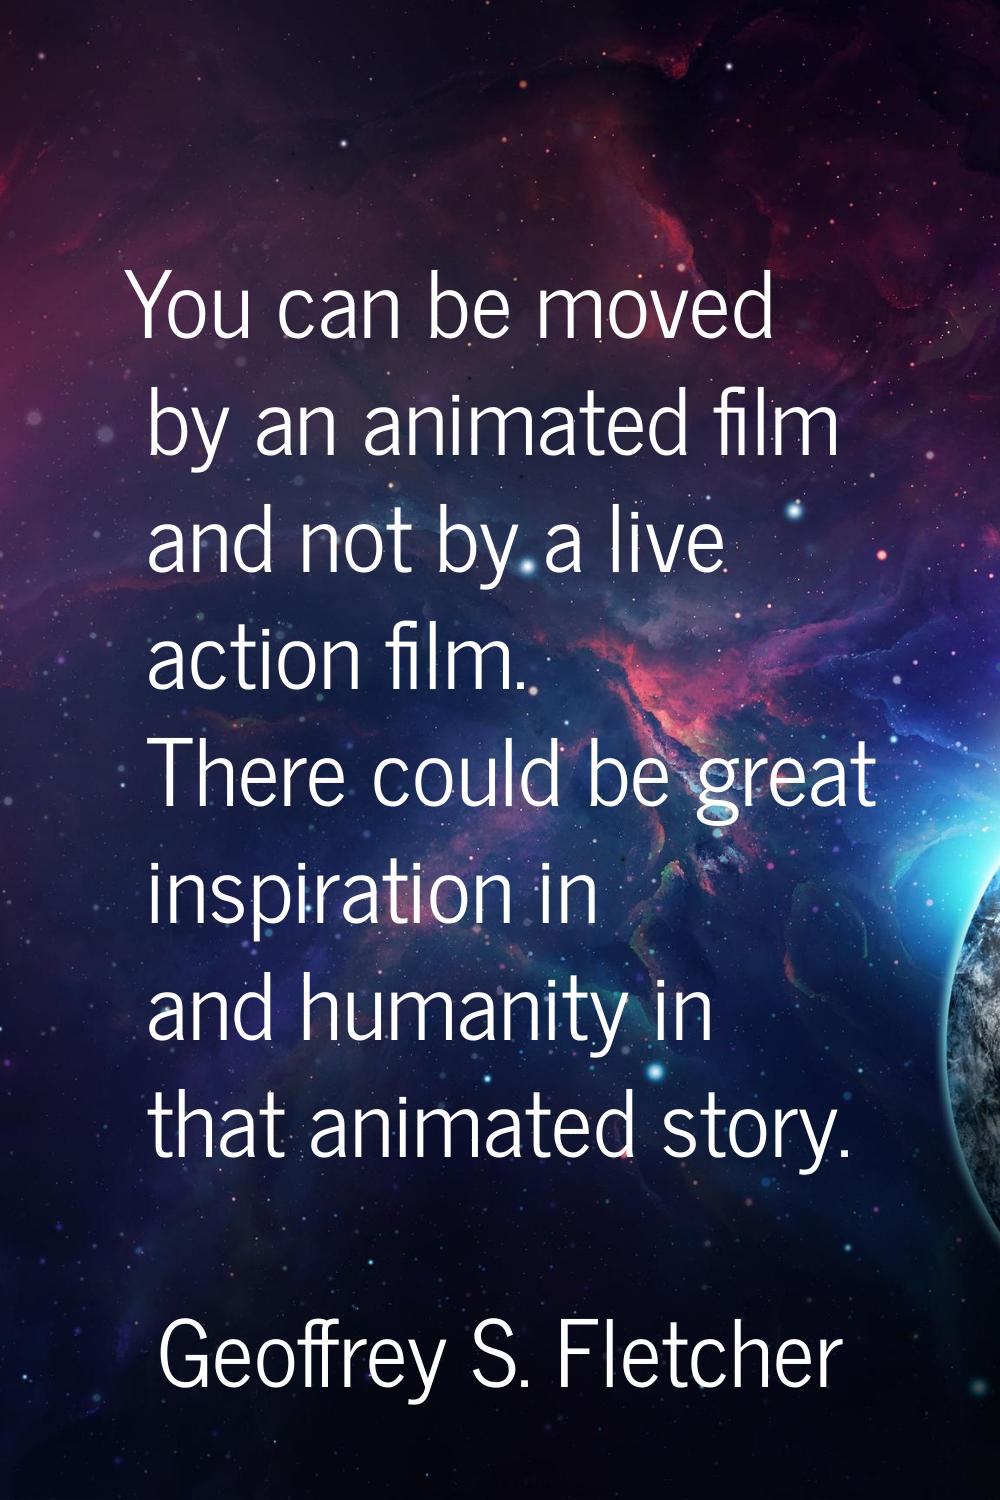 You can be moved by an animated film and not by a live action film. There could be great inspiratio